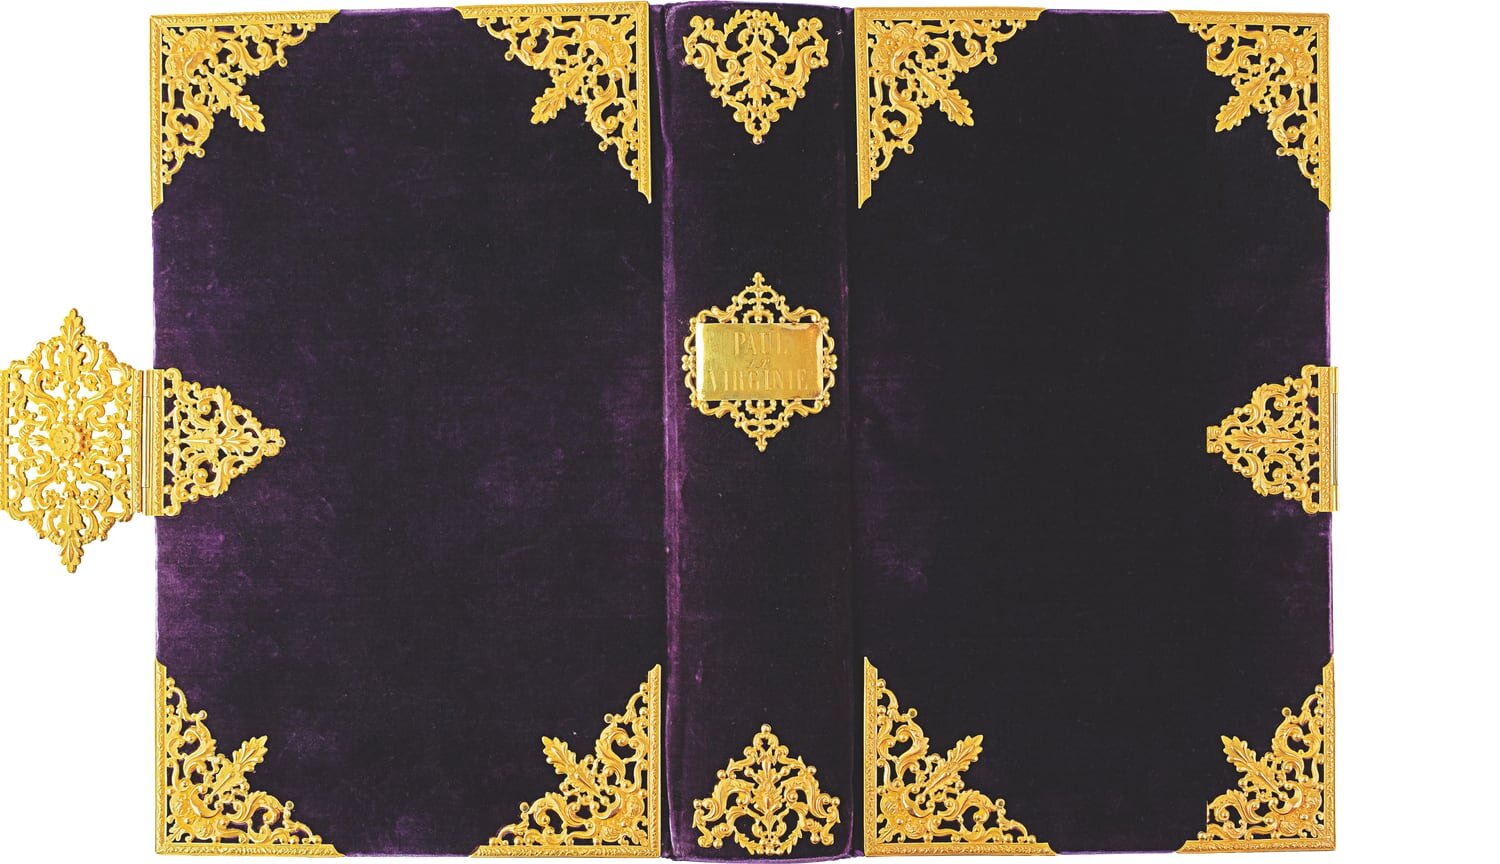  A copy in a velvet binding by Alphonse Giroux with gilded fittings [no. 53]. 